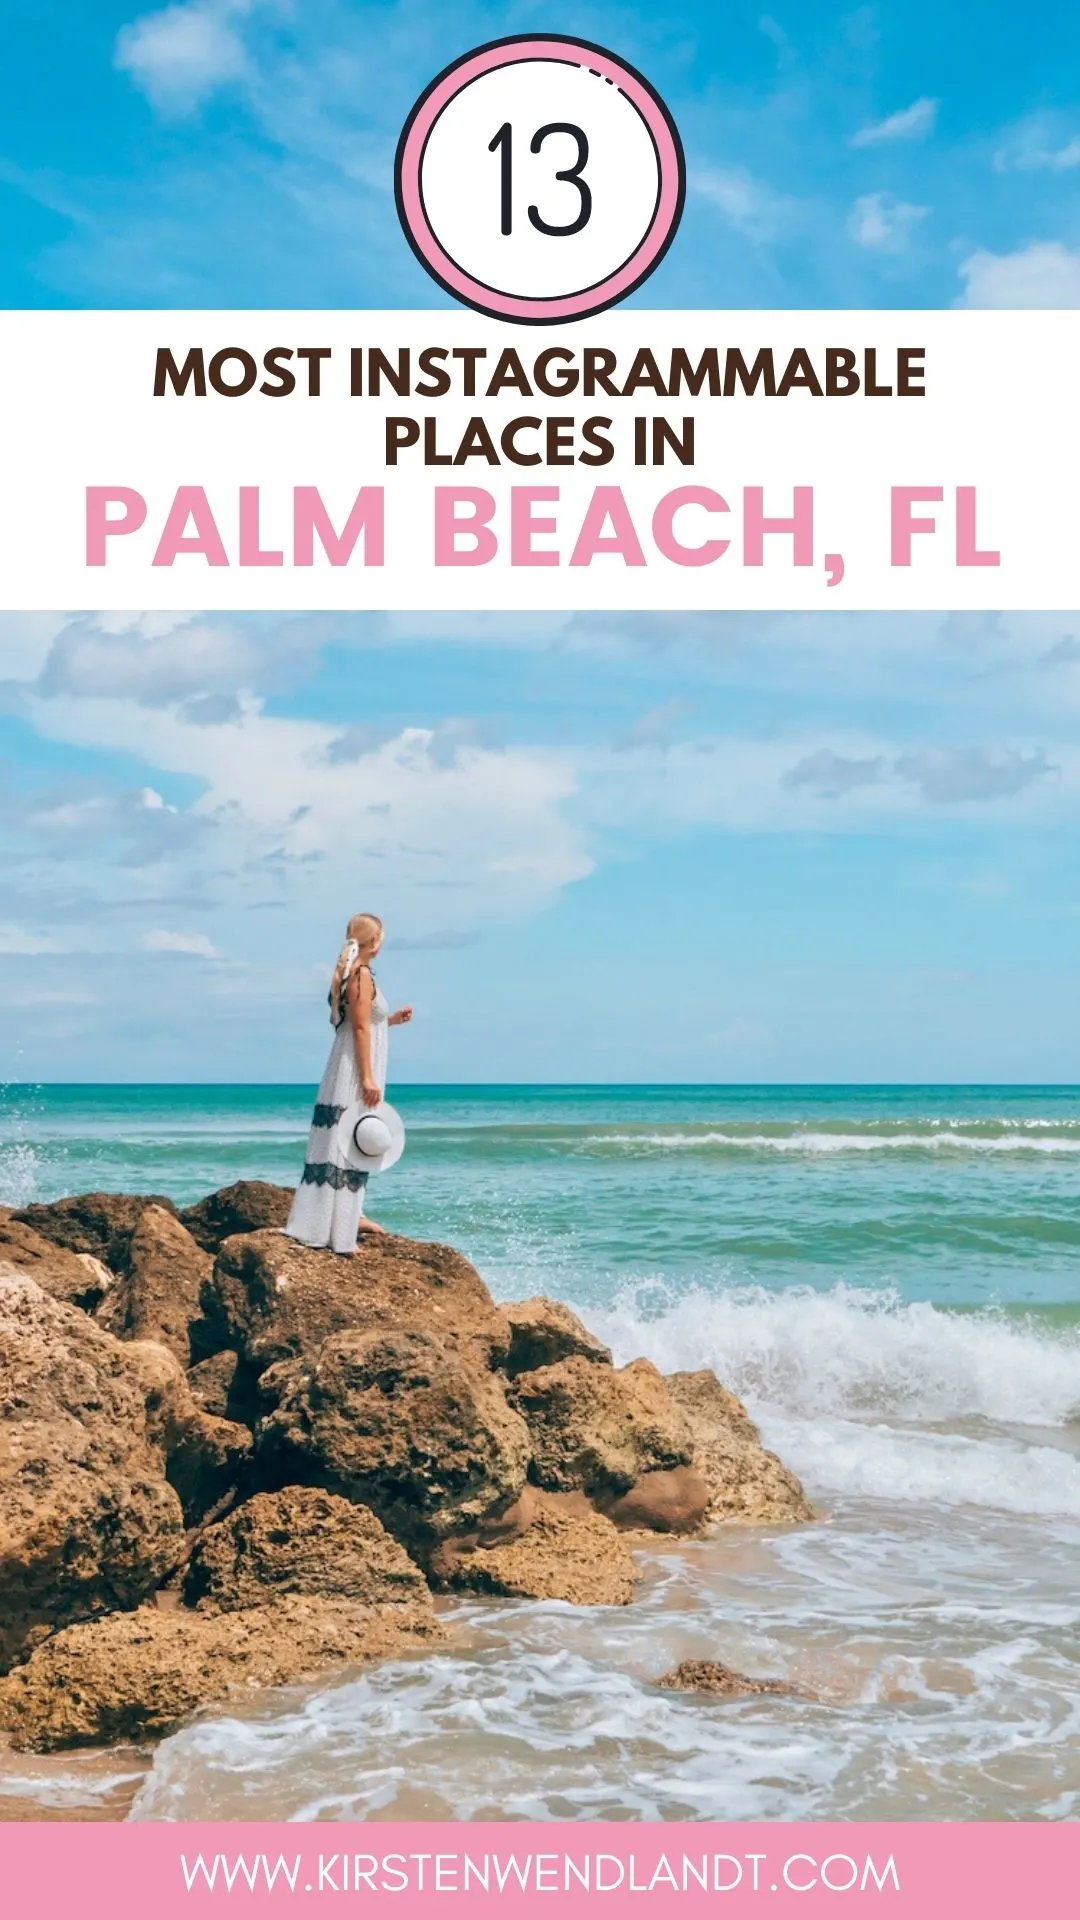 Palm Beach is a beautiful town in the South of Florida that's known for it's glamorous estates and sprawling beaches. It's no surprise that this stunning little town is chock full of incredible instagram-worthy photo spots. If you're planning on visiting Palm Beach soon and hoping to get some great photos while you're there, you definitely won't want to miss this guide on the most instagrammables places in Palm Beach!